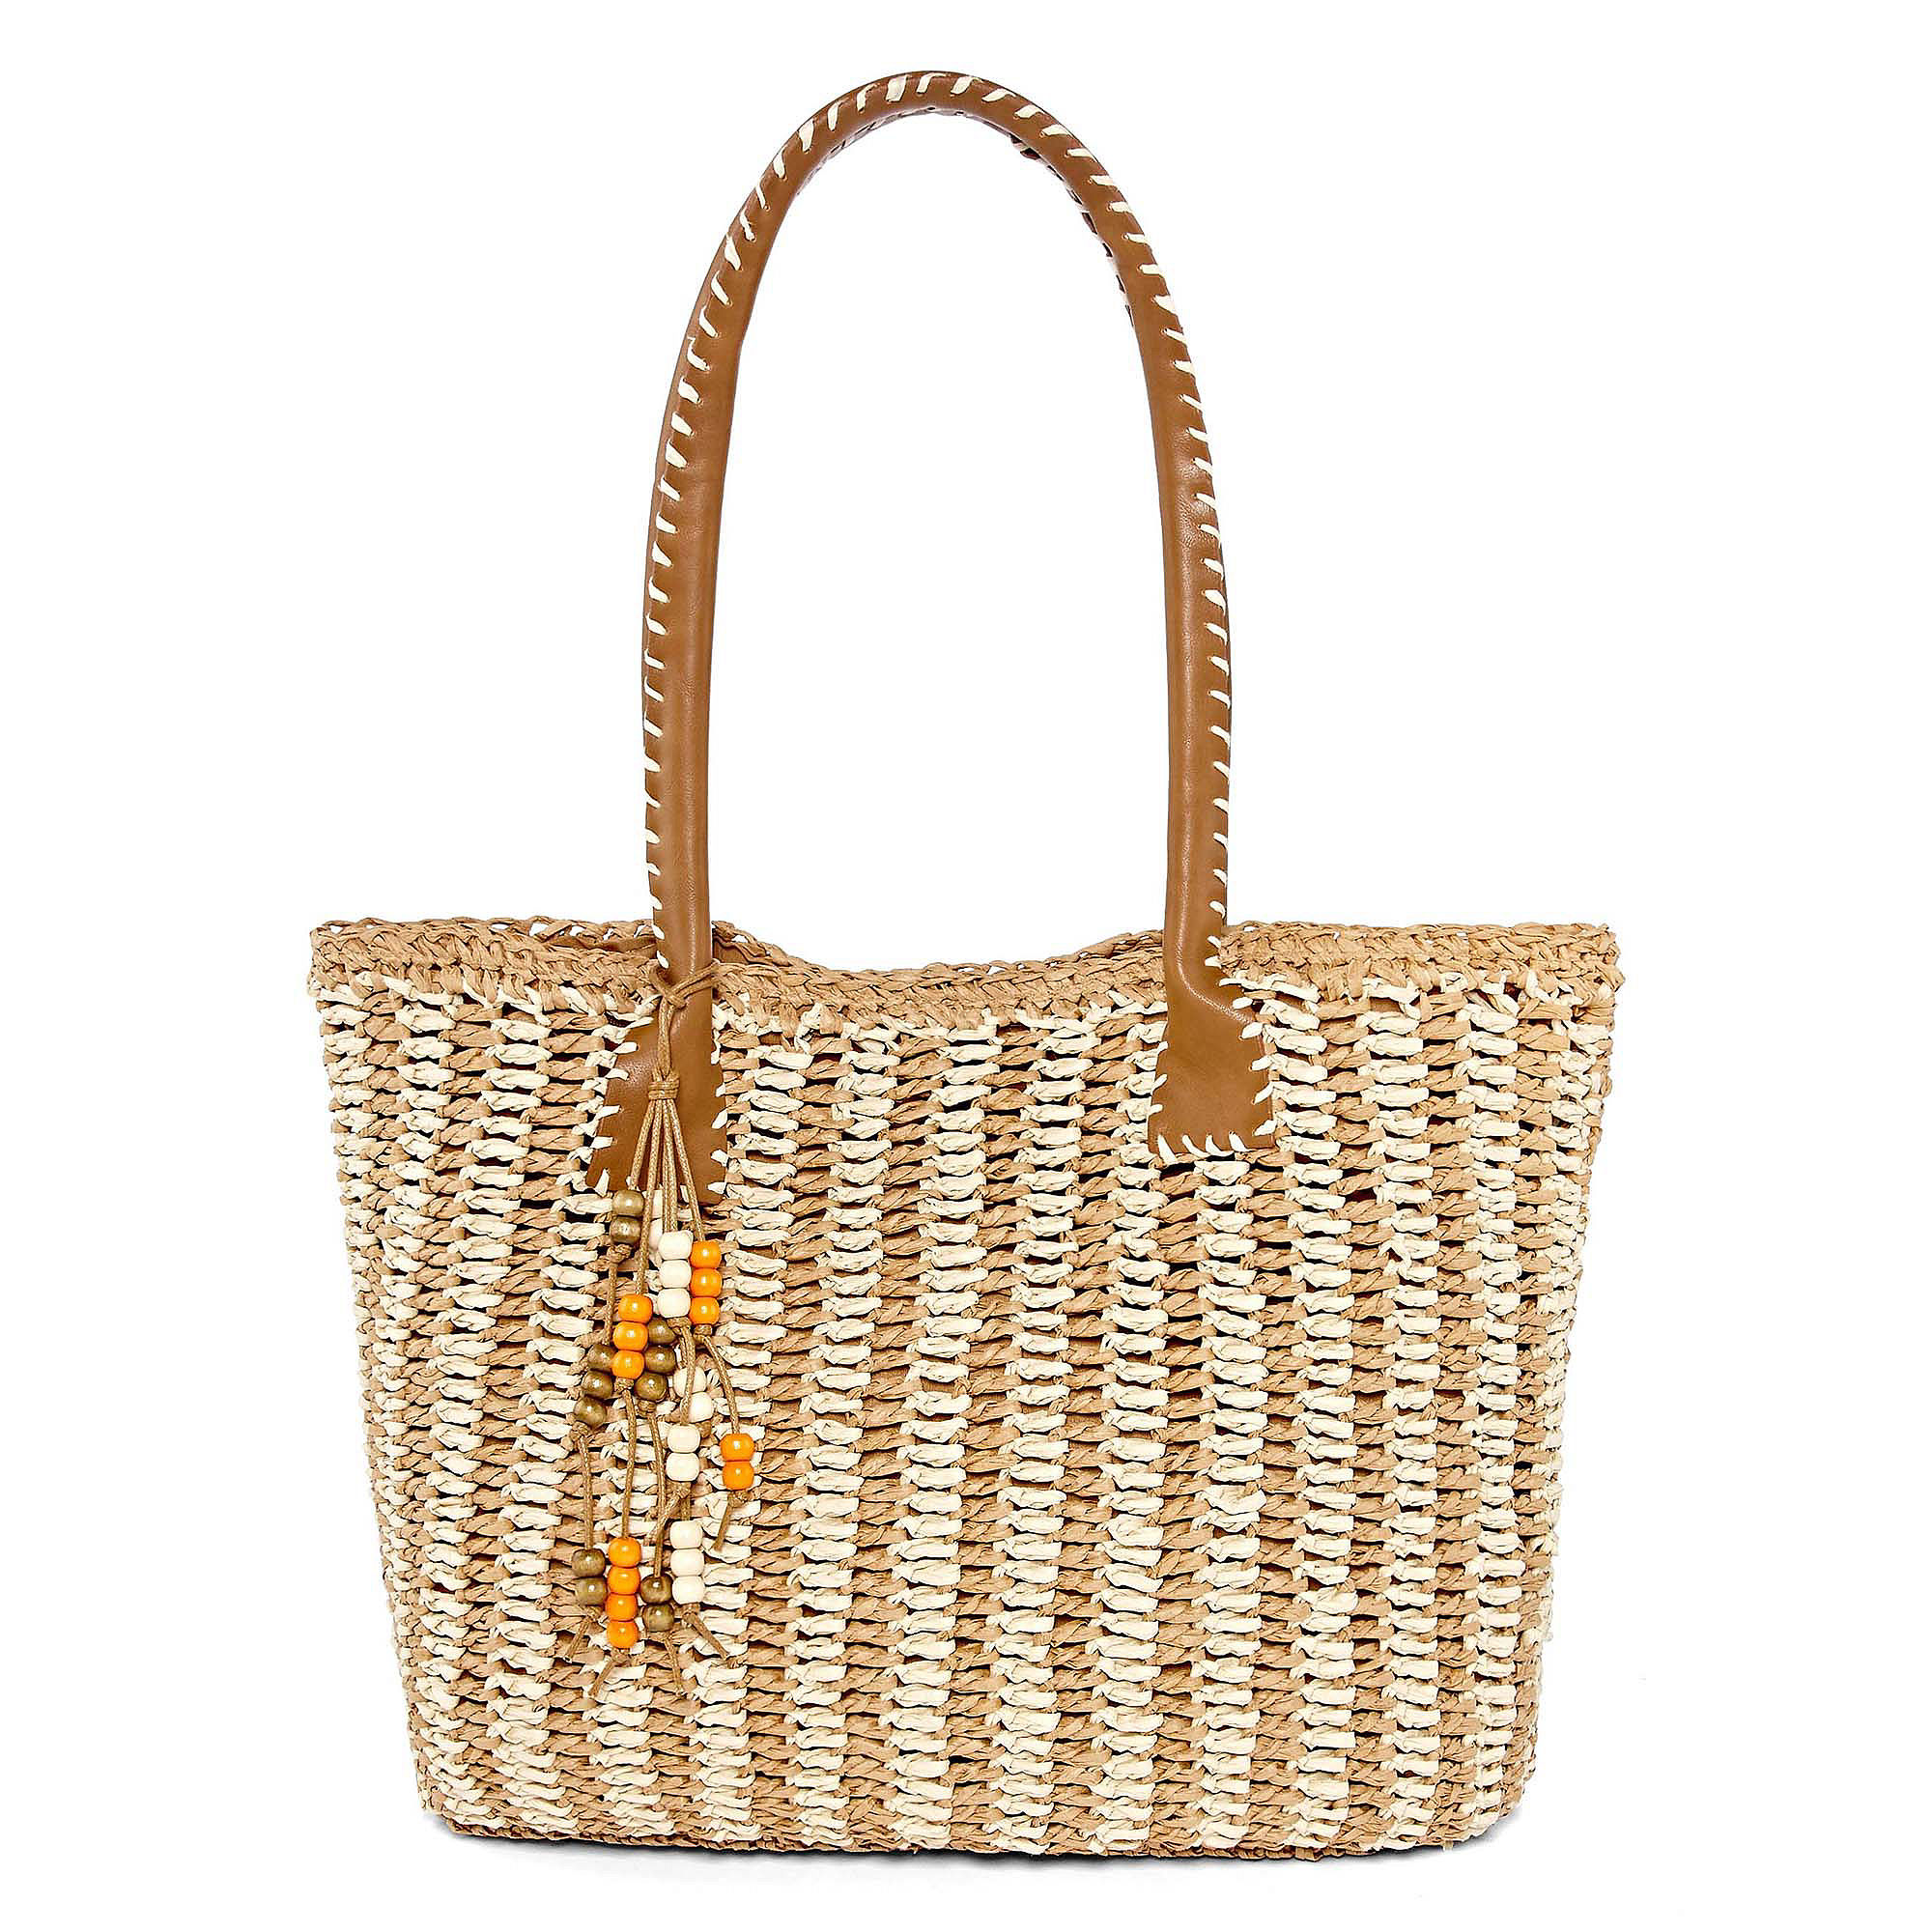 Straw Studios bags. YOOLIFE Mothers Day Gifts - Gifts for Mom, Mom ...